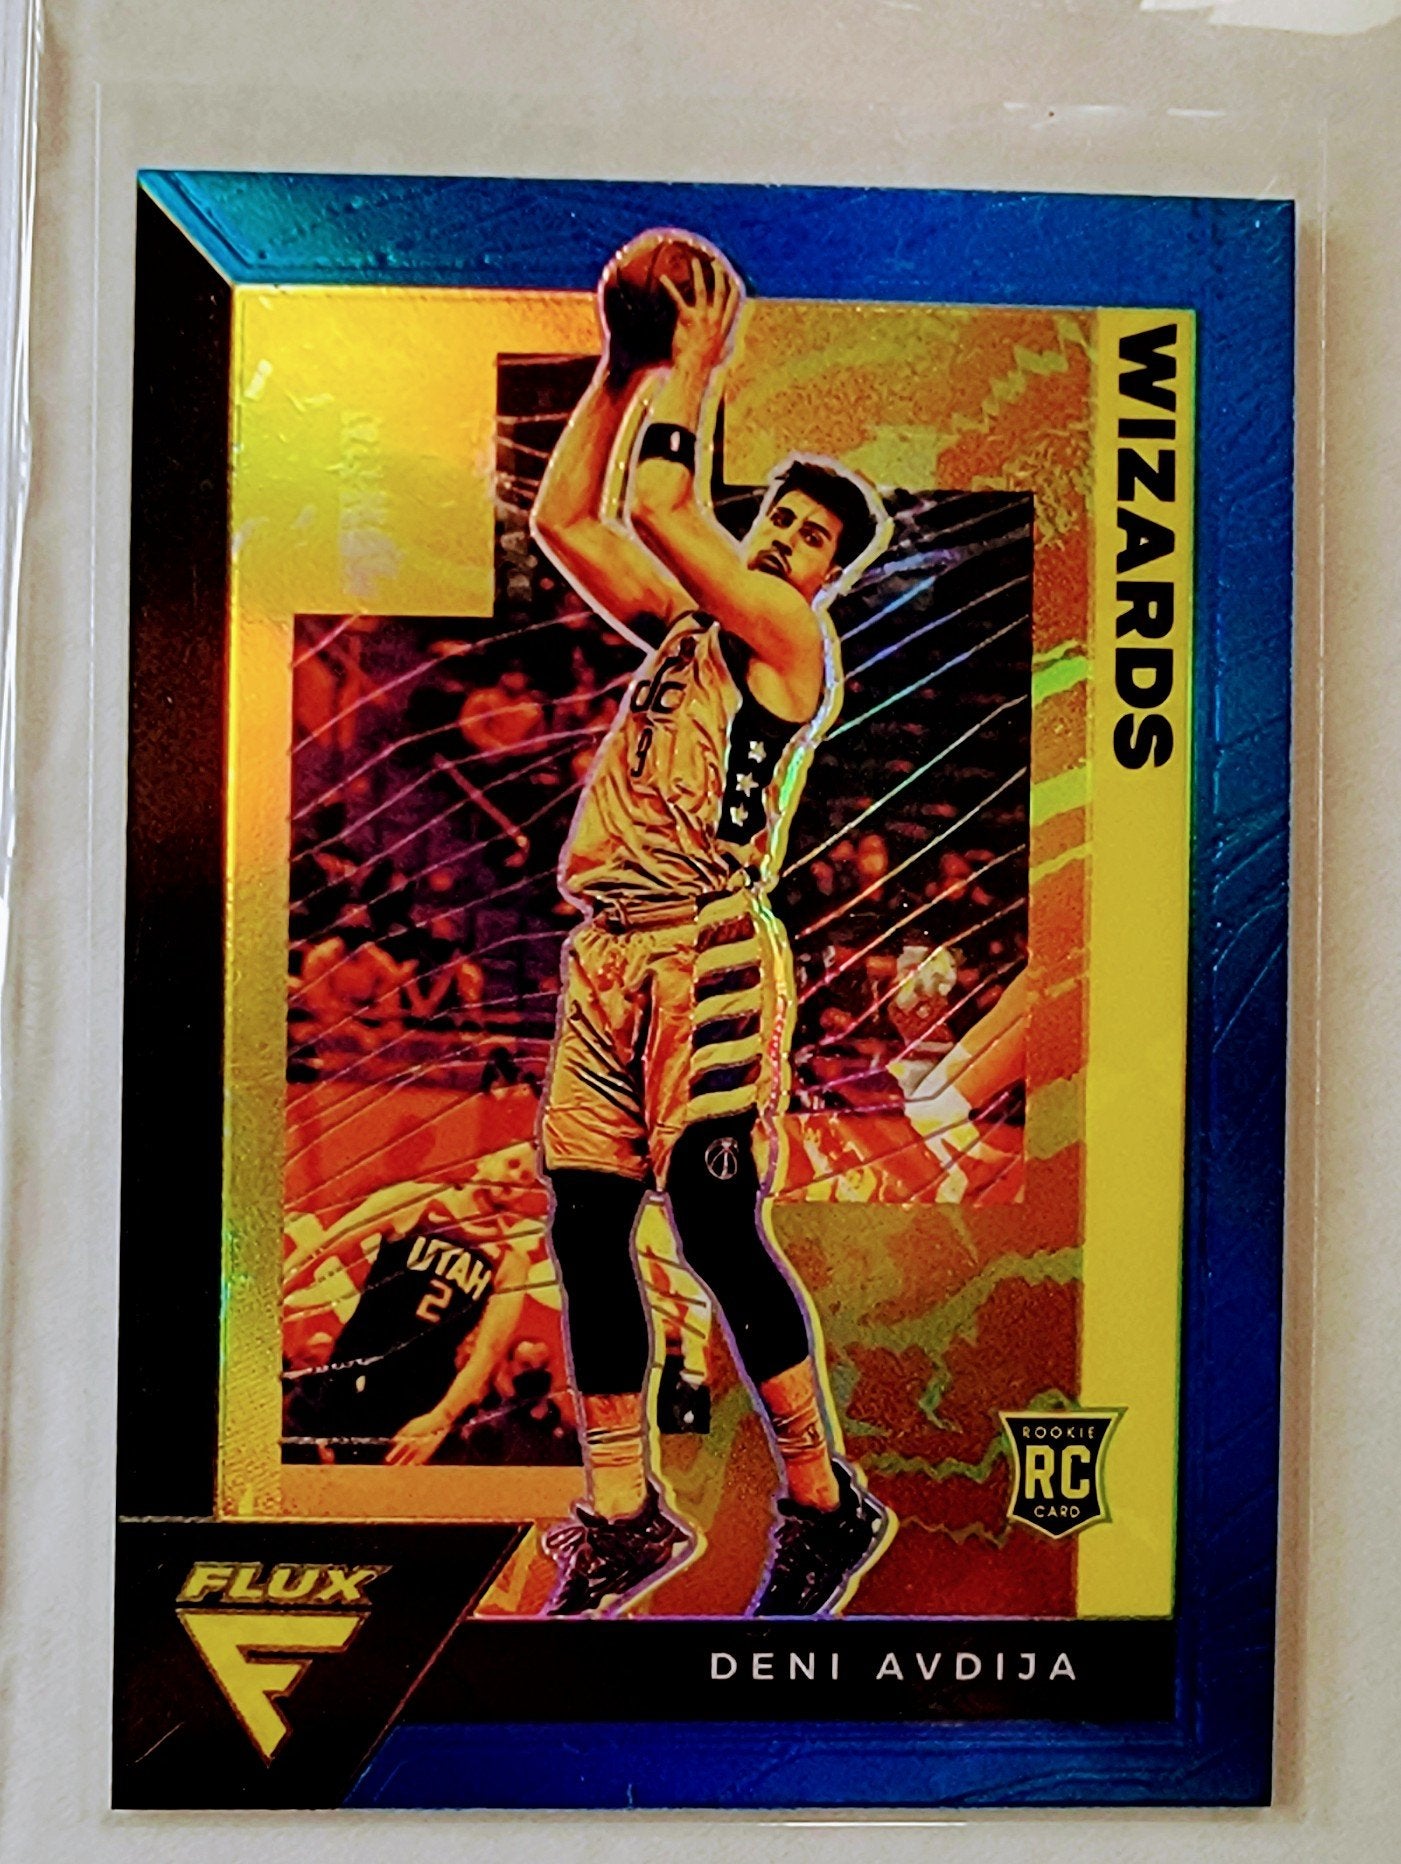 2020-21 Panini Deni Avdija Flux Blue Prizm Parallel Rookie Basketball Card simple Xclusive Collectibles   